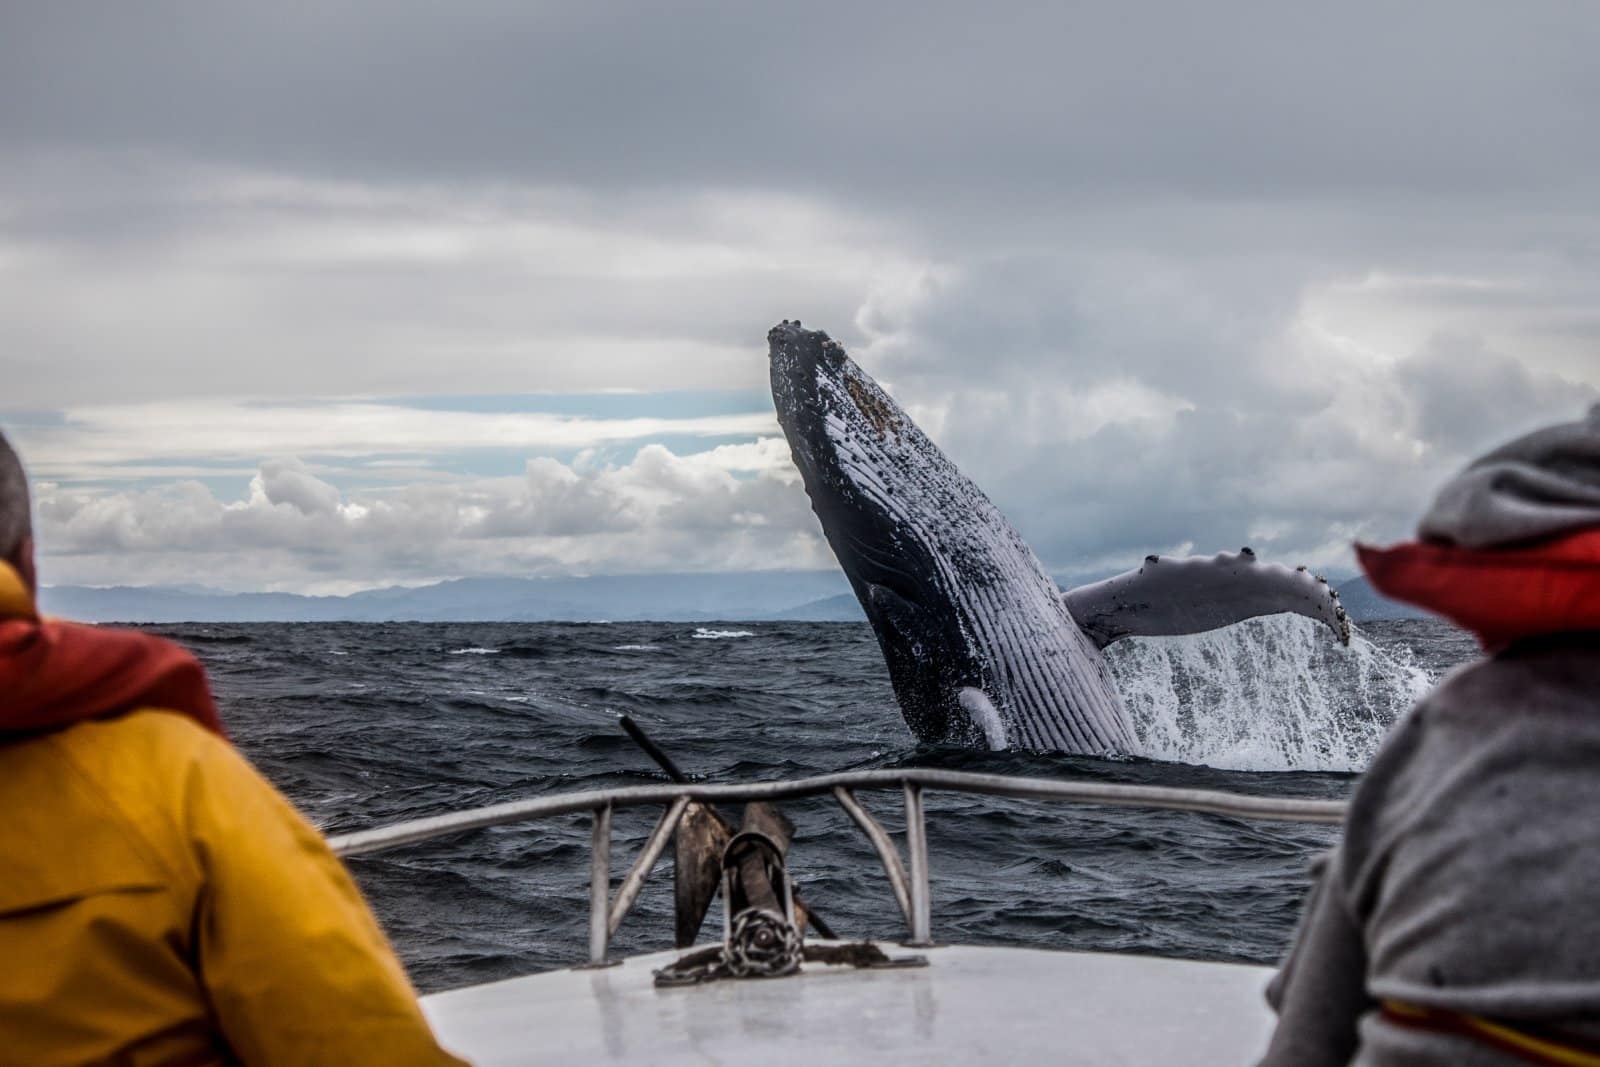 <p class="wp-caption-text">Image Credit: Shutterstock / Alexey Mhoyan</p>  <p>Embark on a whale-watching tour from Bar Harbor or Boothbay Harbor for an unforgettable encounter with the ocean’s giants. It’s a must-do experience, with options for every budget.</p>